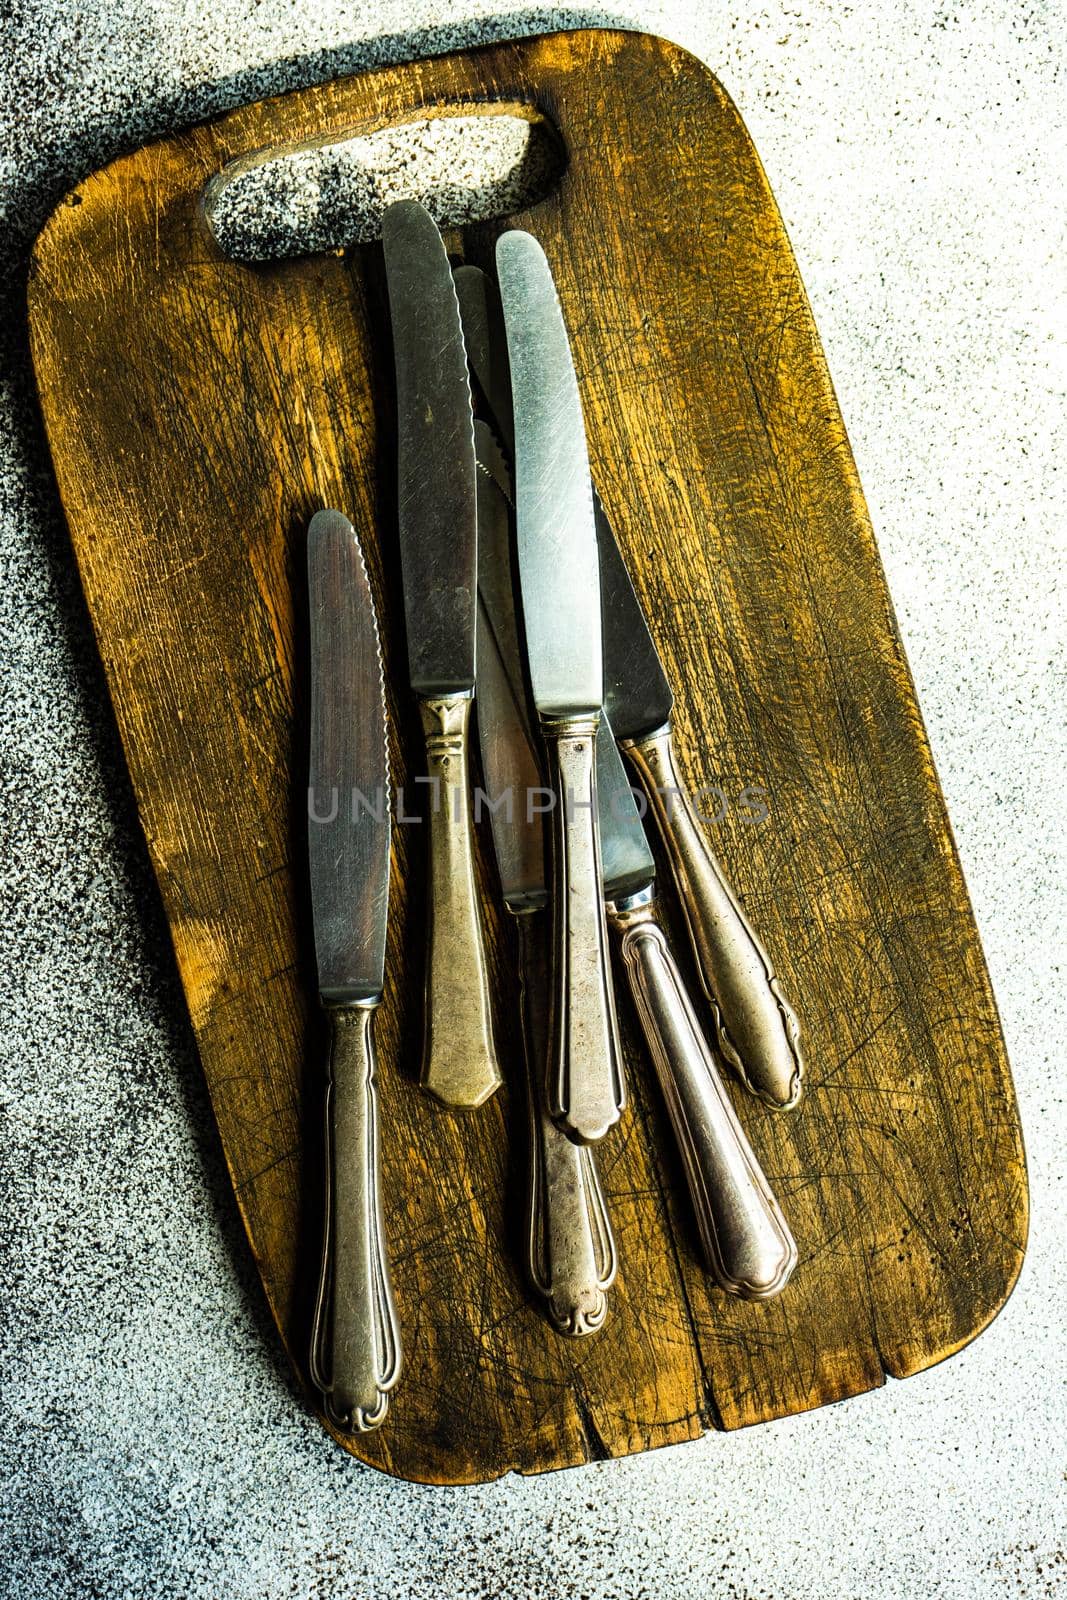 Old knives on the board by Elet